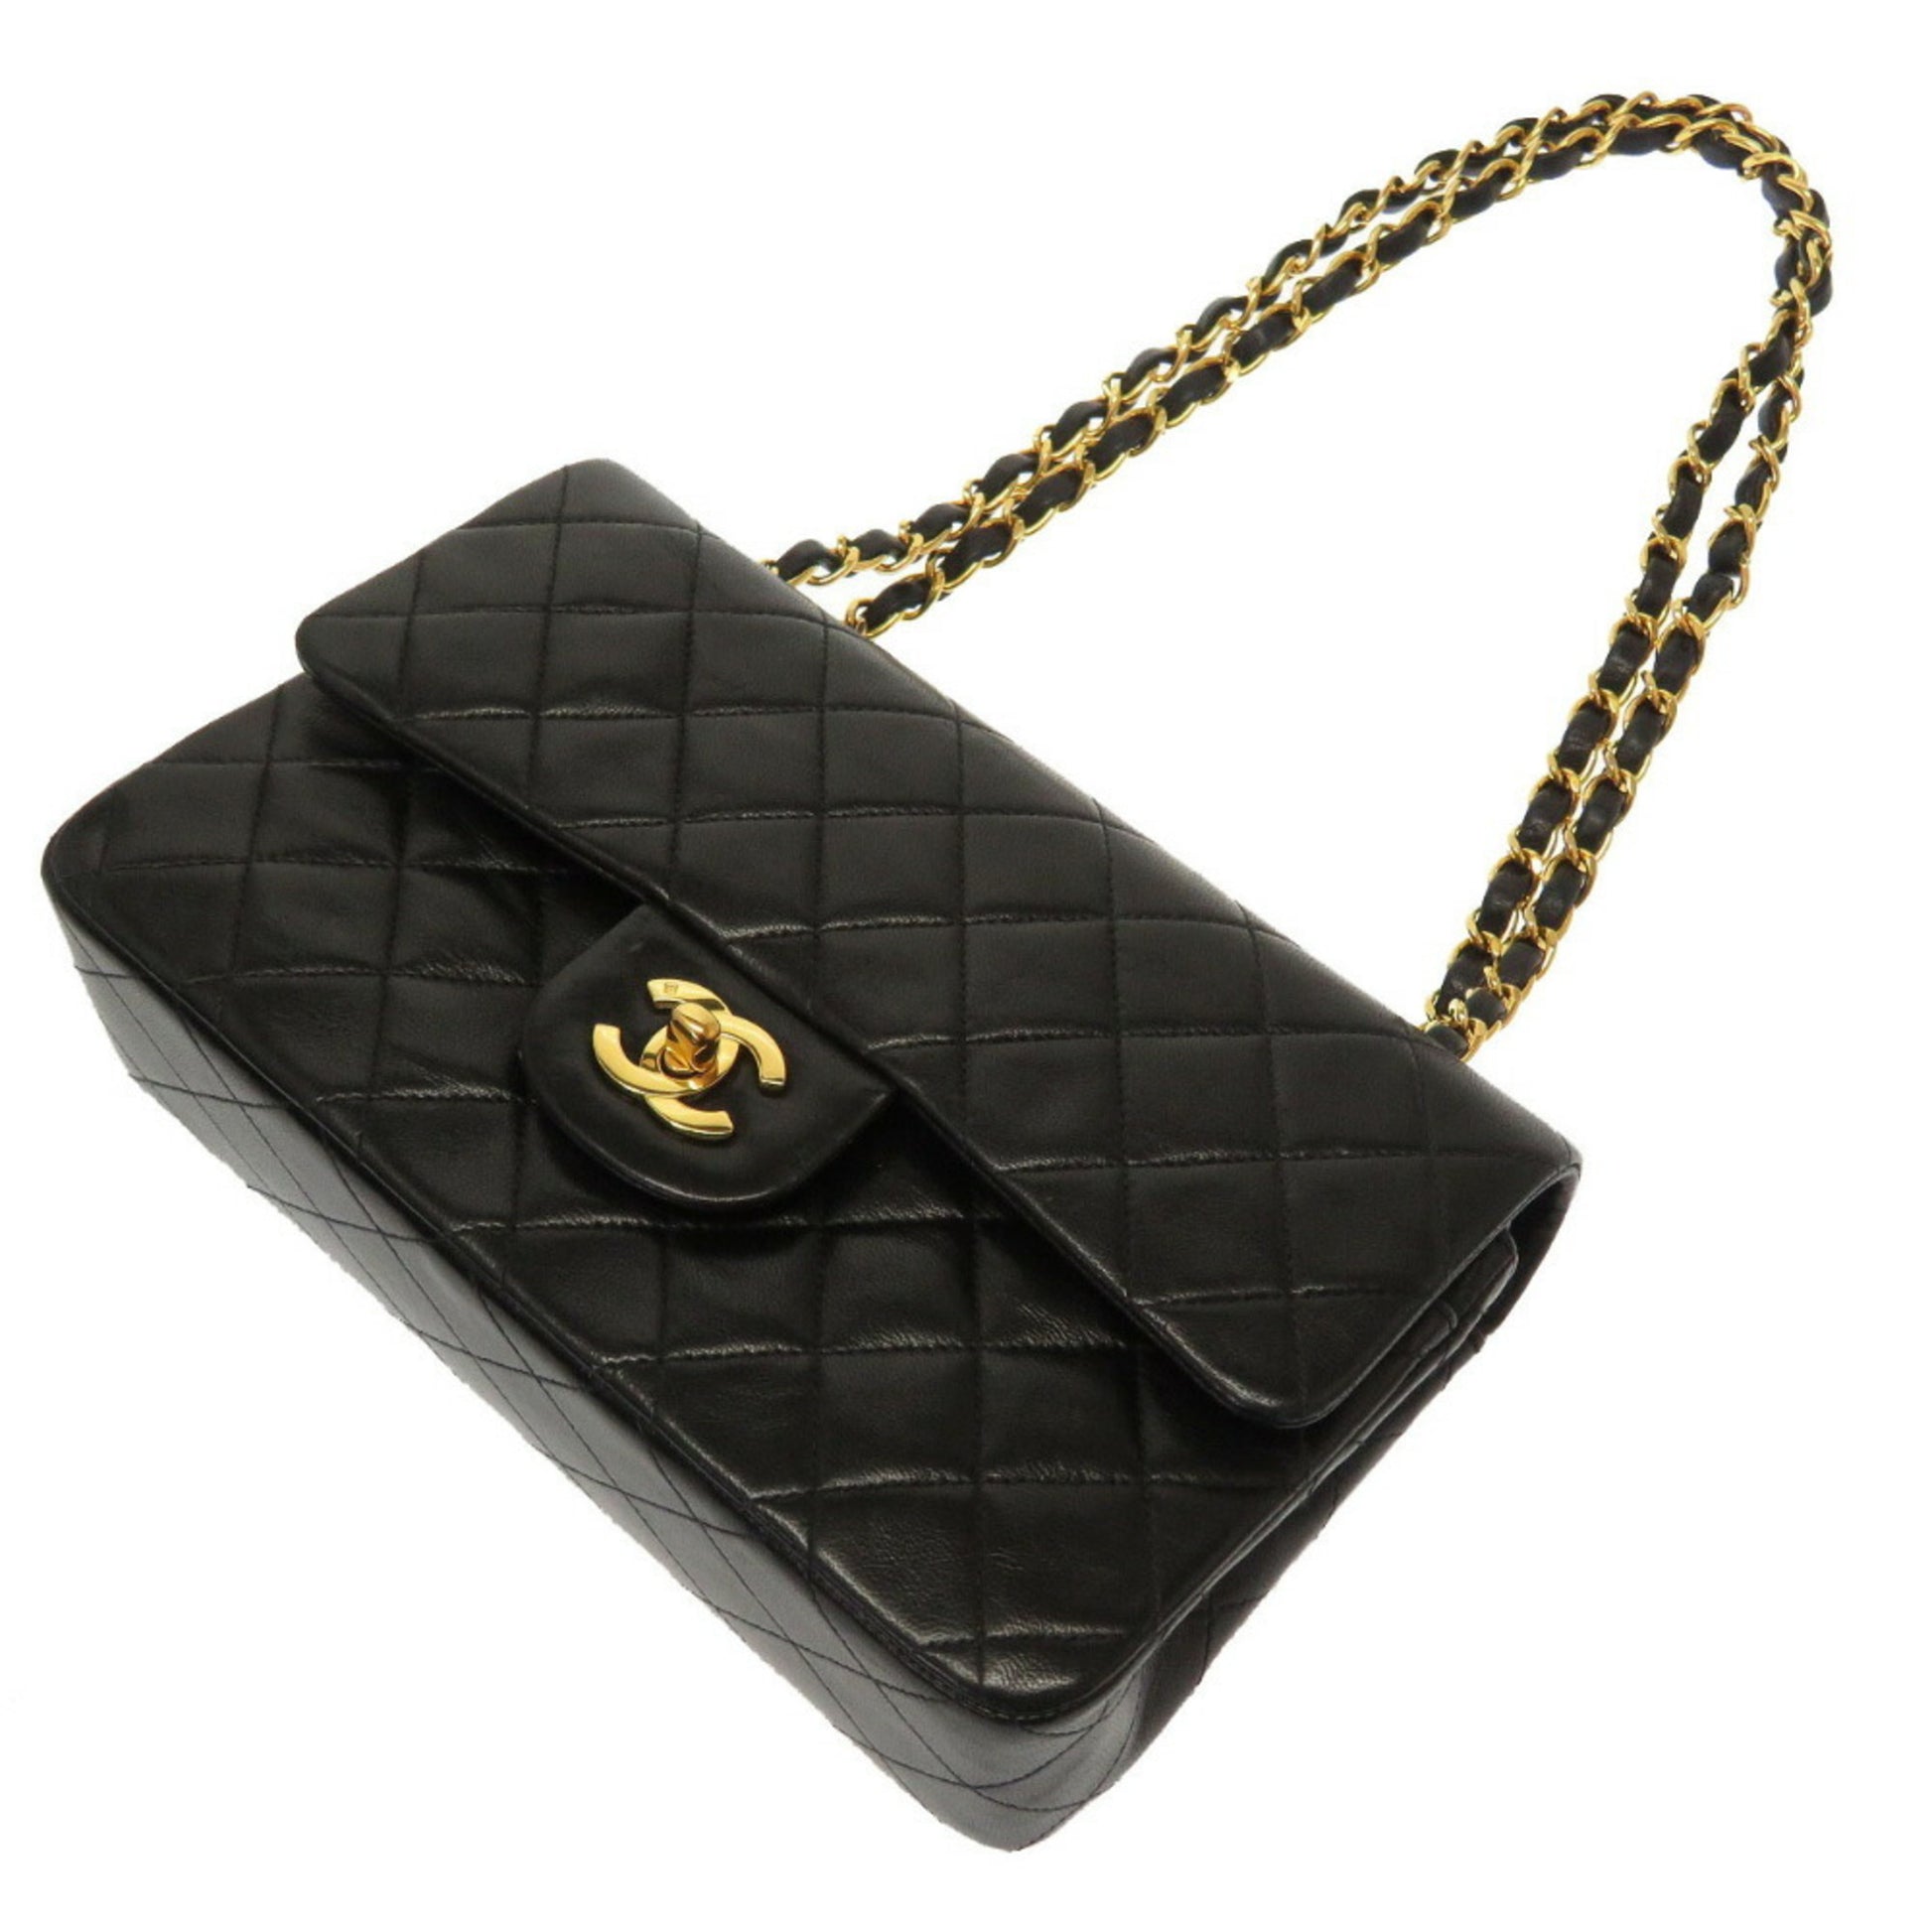 CHANEL, Bags, Chanel Perforated Flap Chain Strap Shoulder Bag